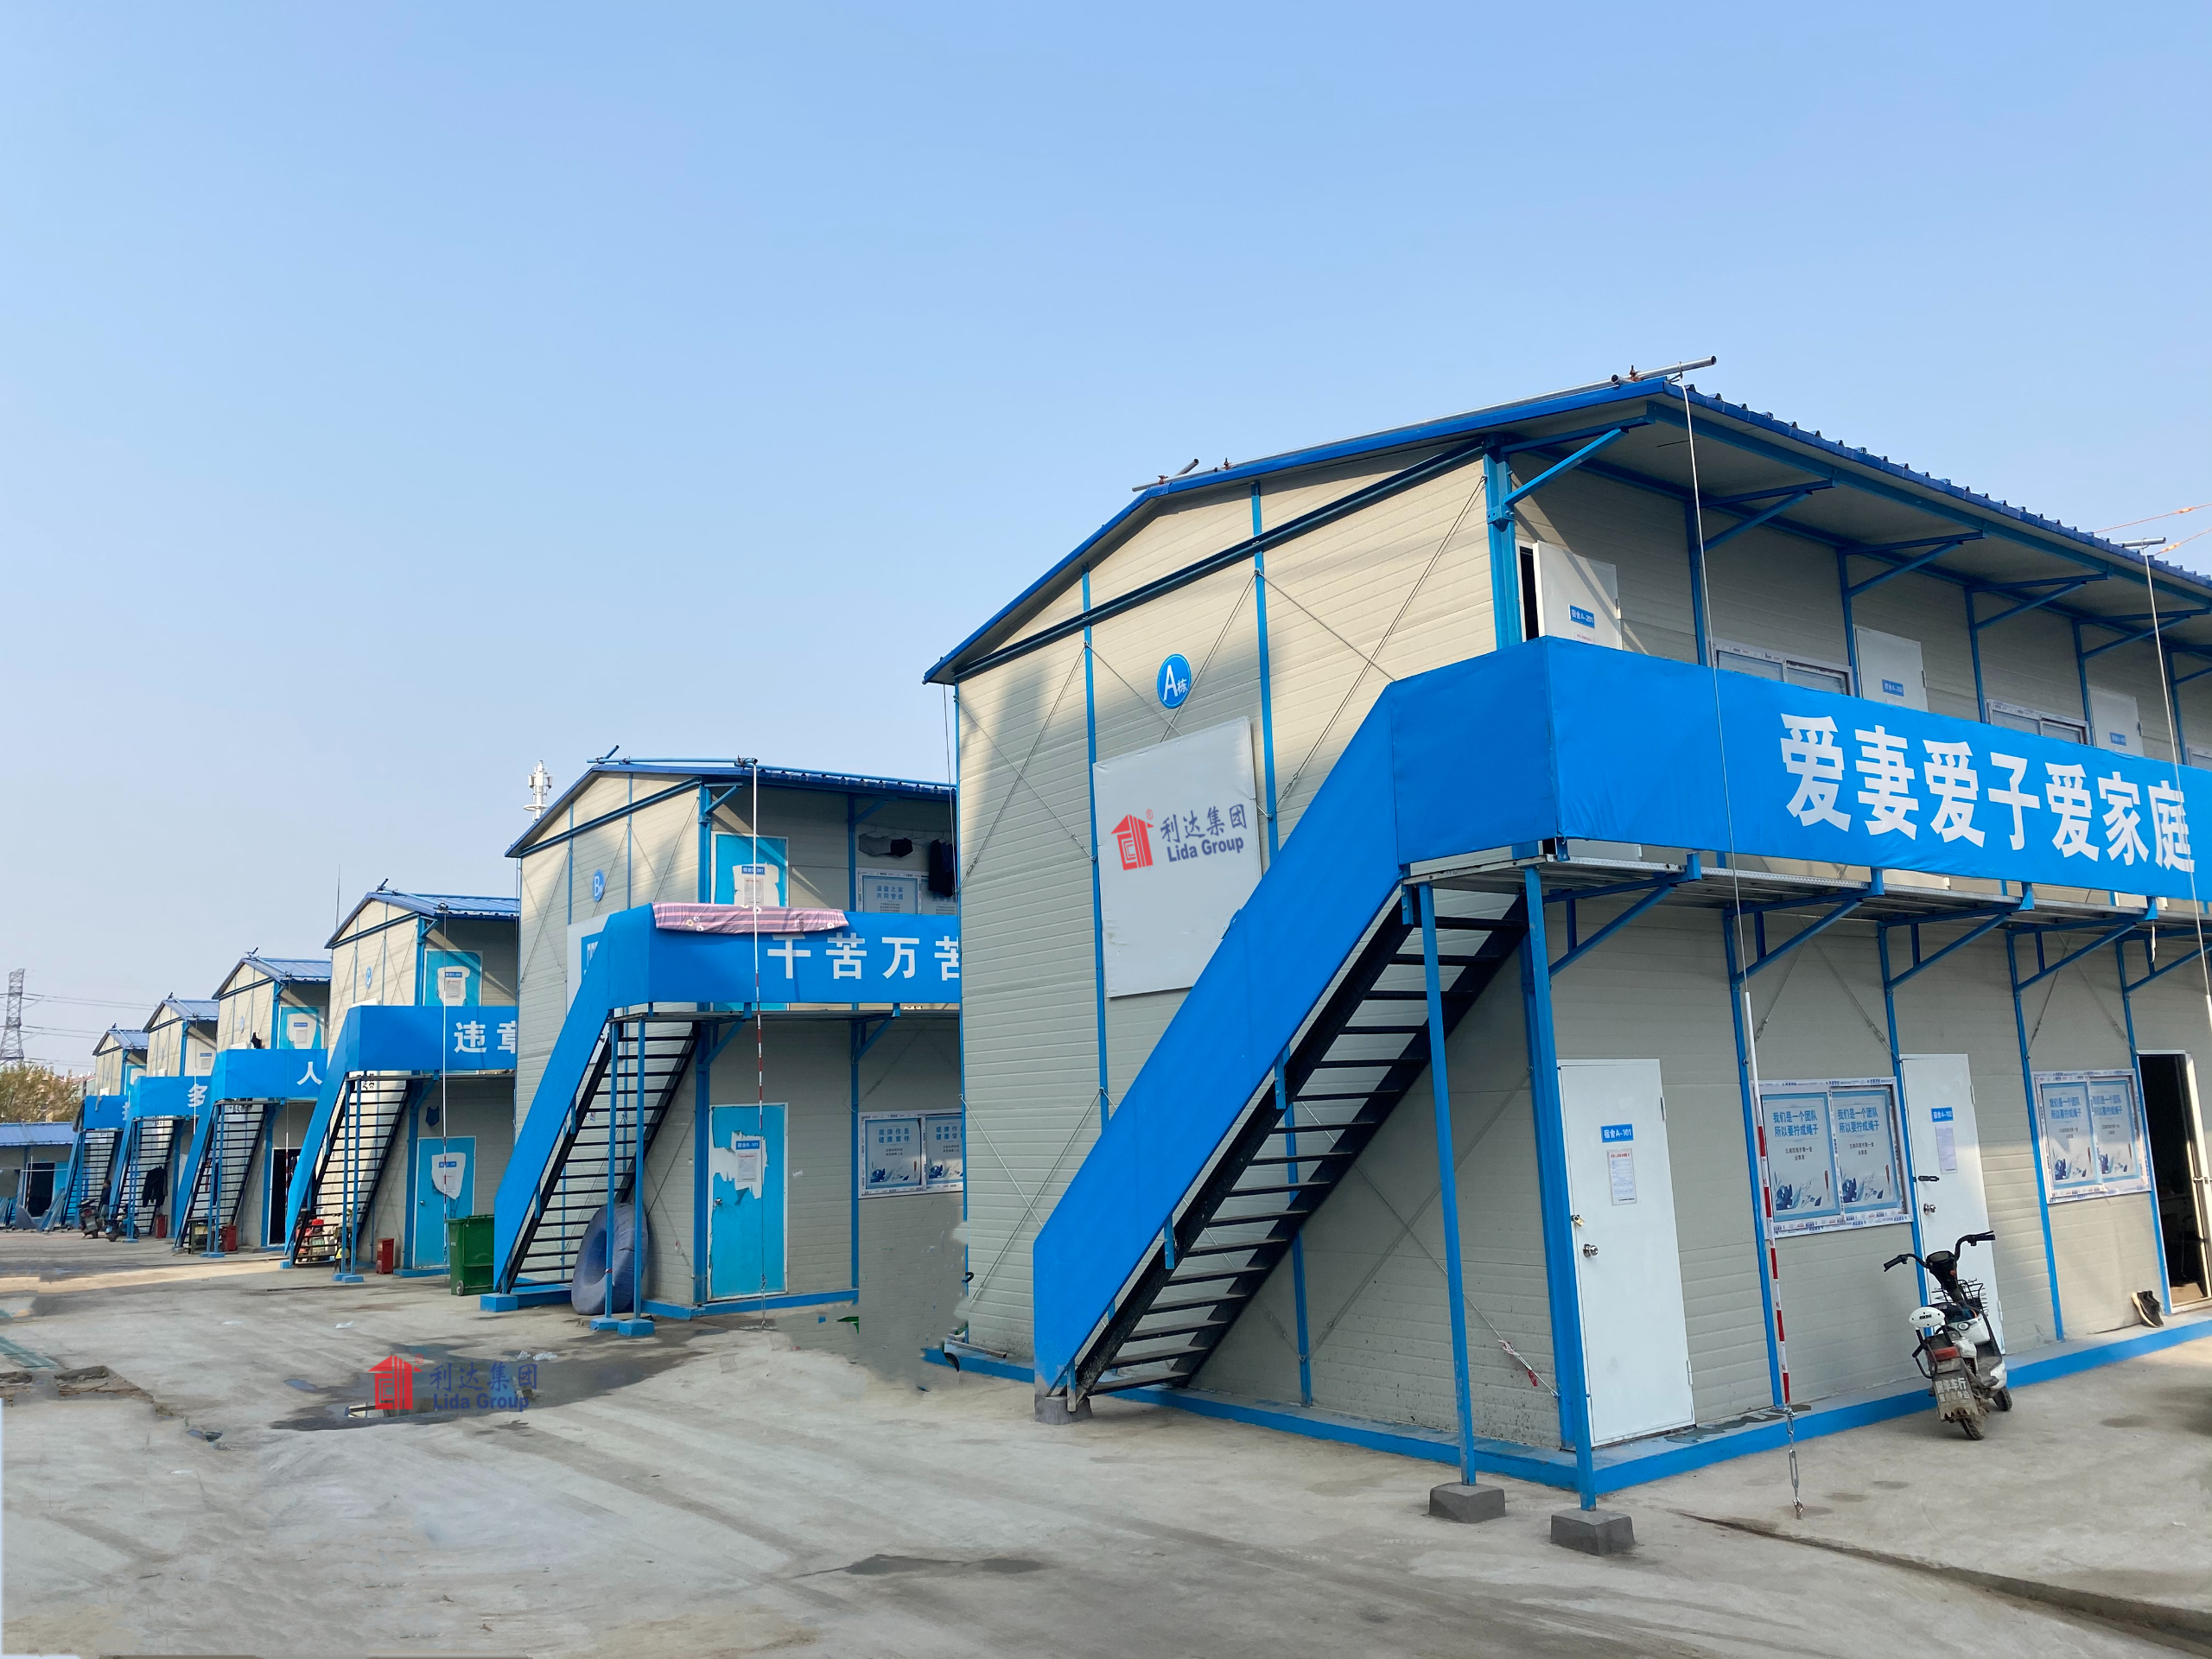 Lida Group launches prefabricated sandwich panel multi-building housing component manufacturing facility to mass produce integrated modular construction units for affordable prefab homes worldwide